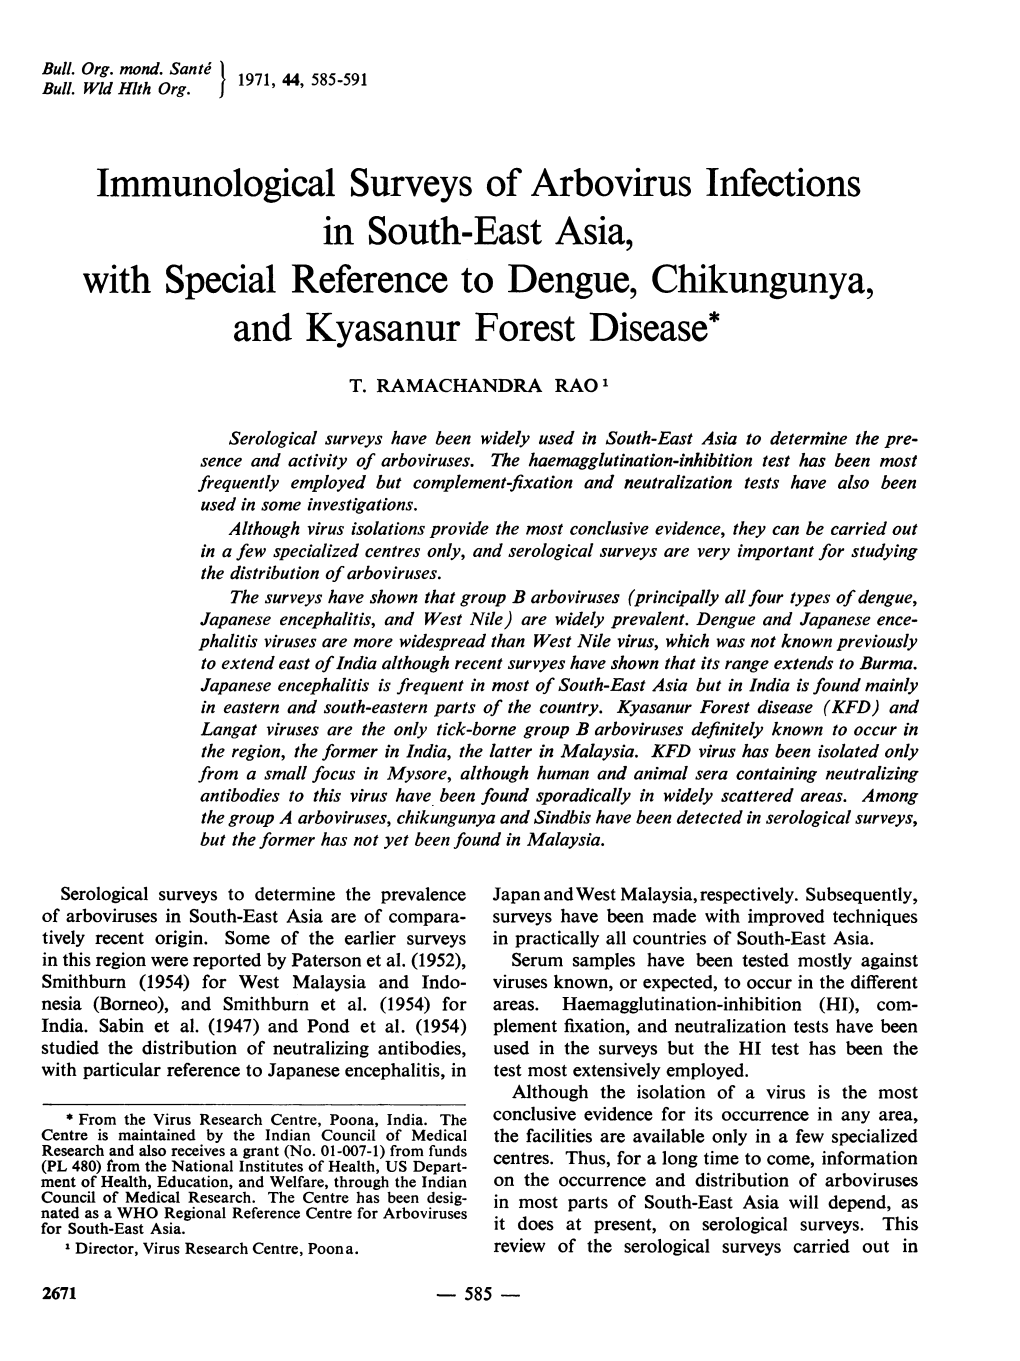 In South-East Asia, with Special Reference to Dengue, Chikungunya, and Kyasanur Forest Disease*